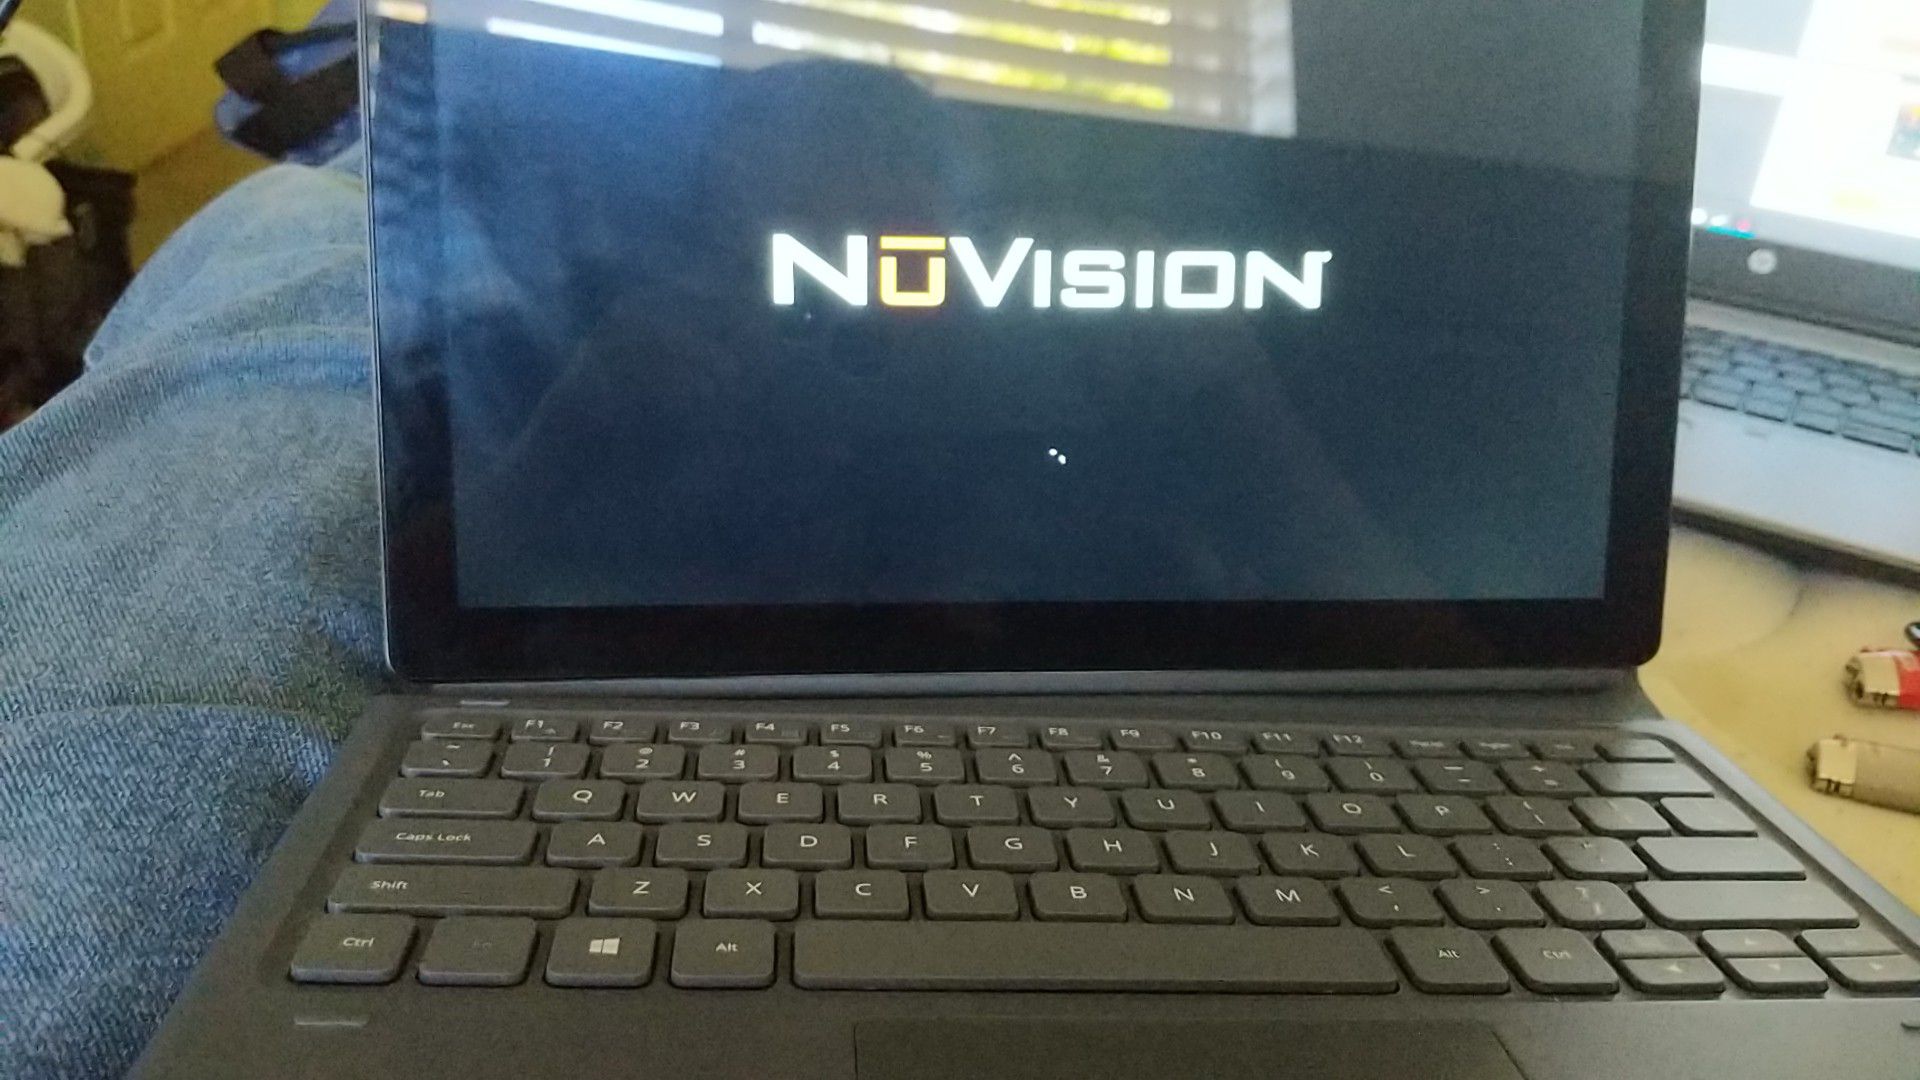 NuVision Windows Laptop/Tablet combo